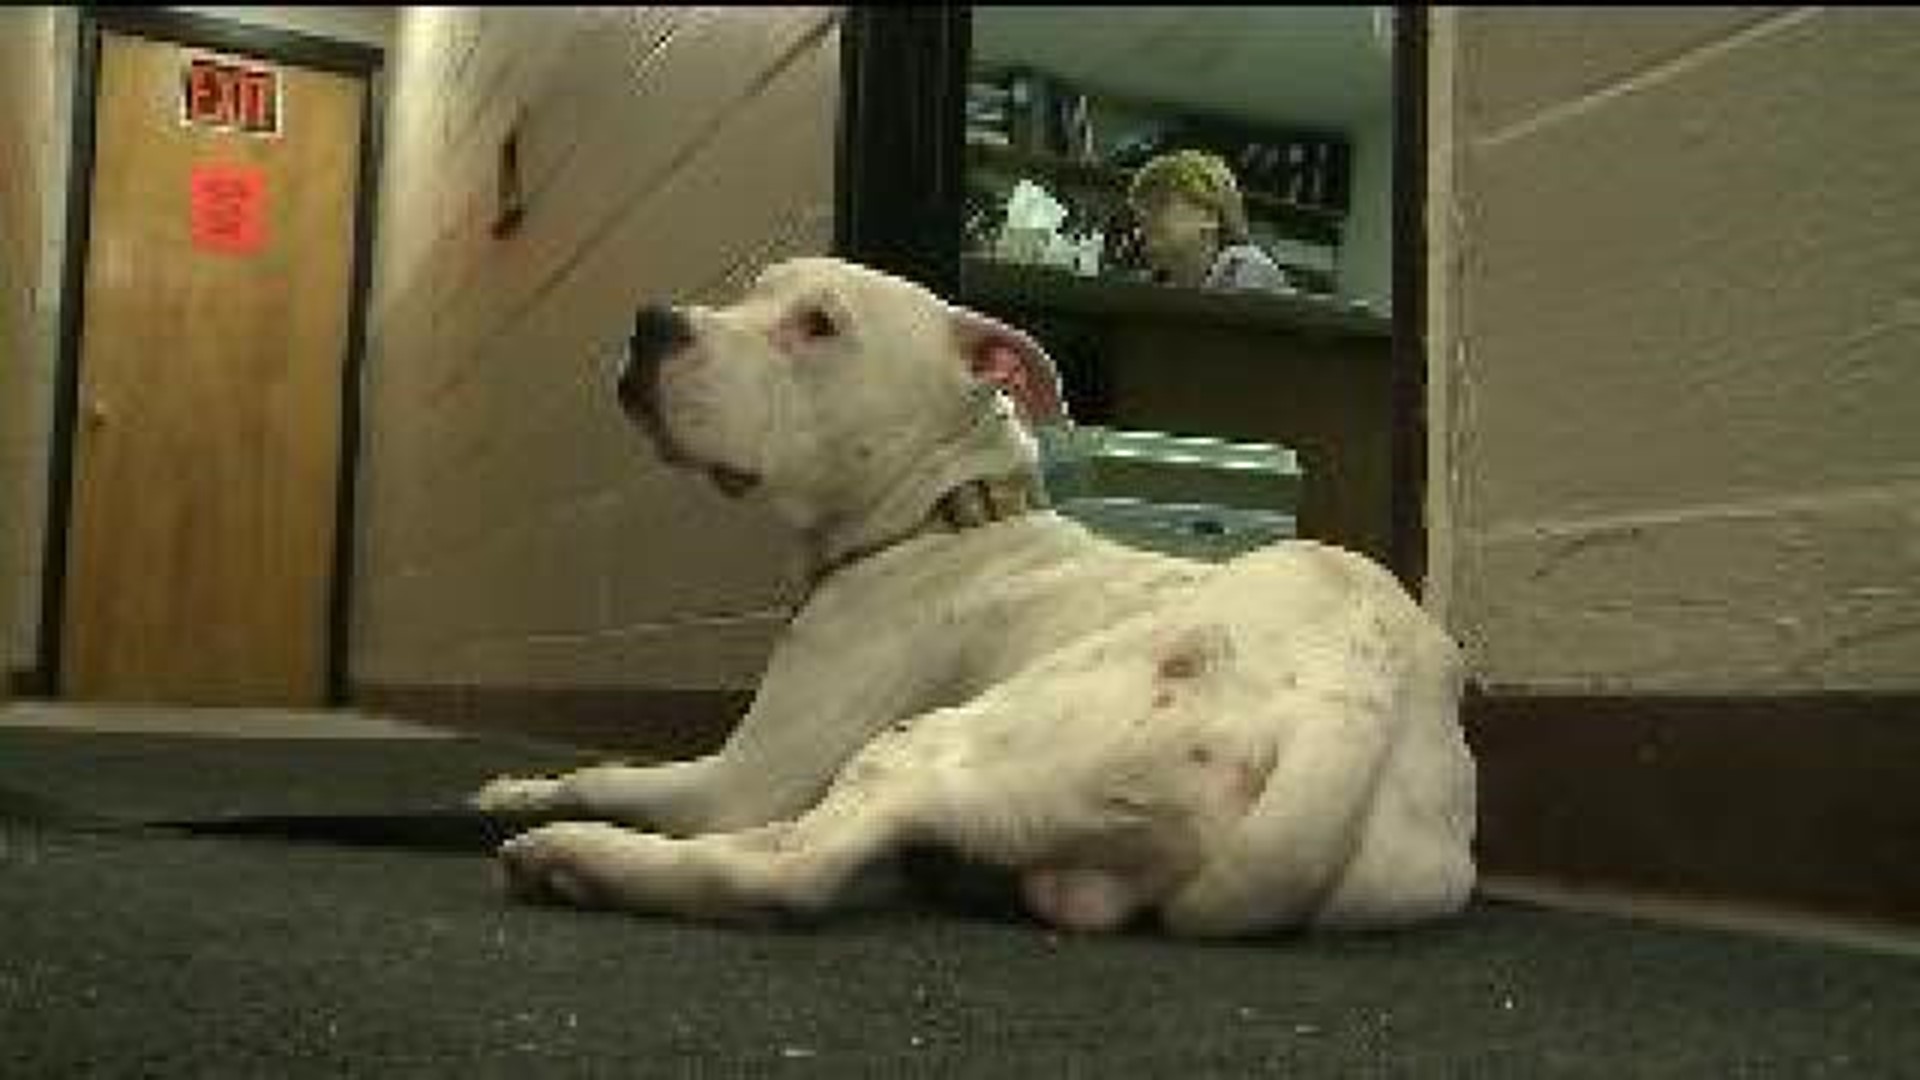 Police: Dog Tied And Abandoned In The Cold